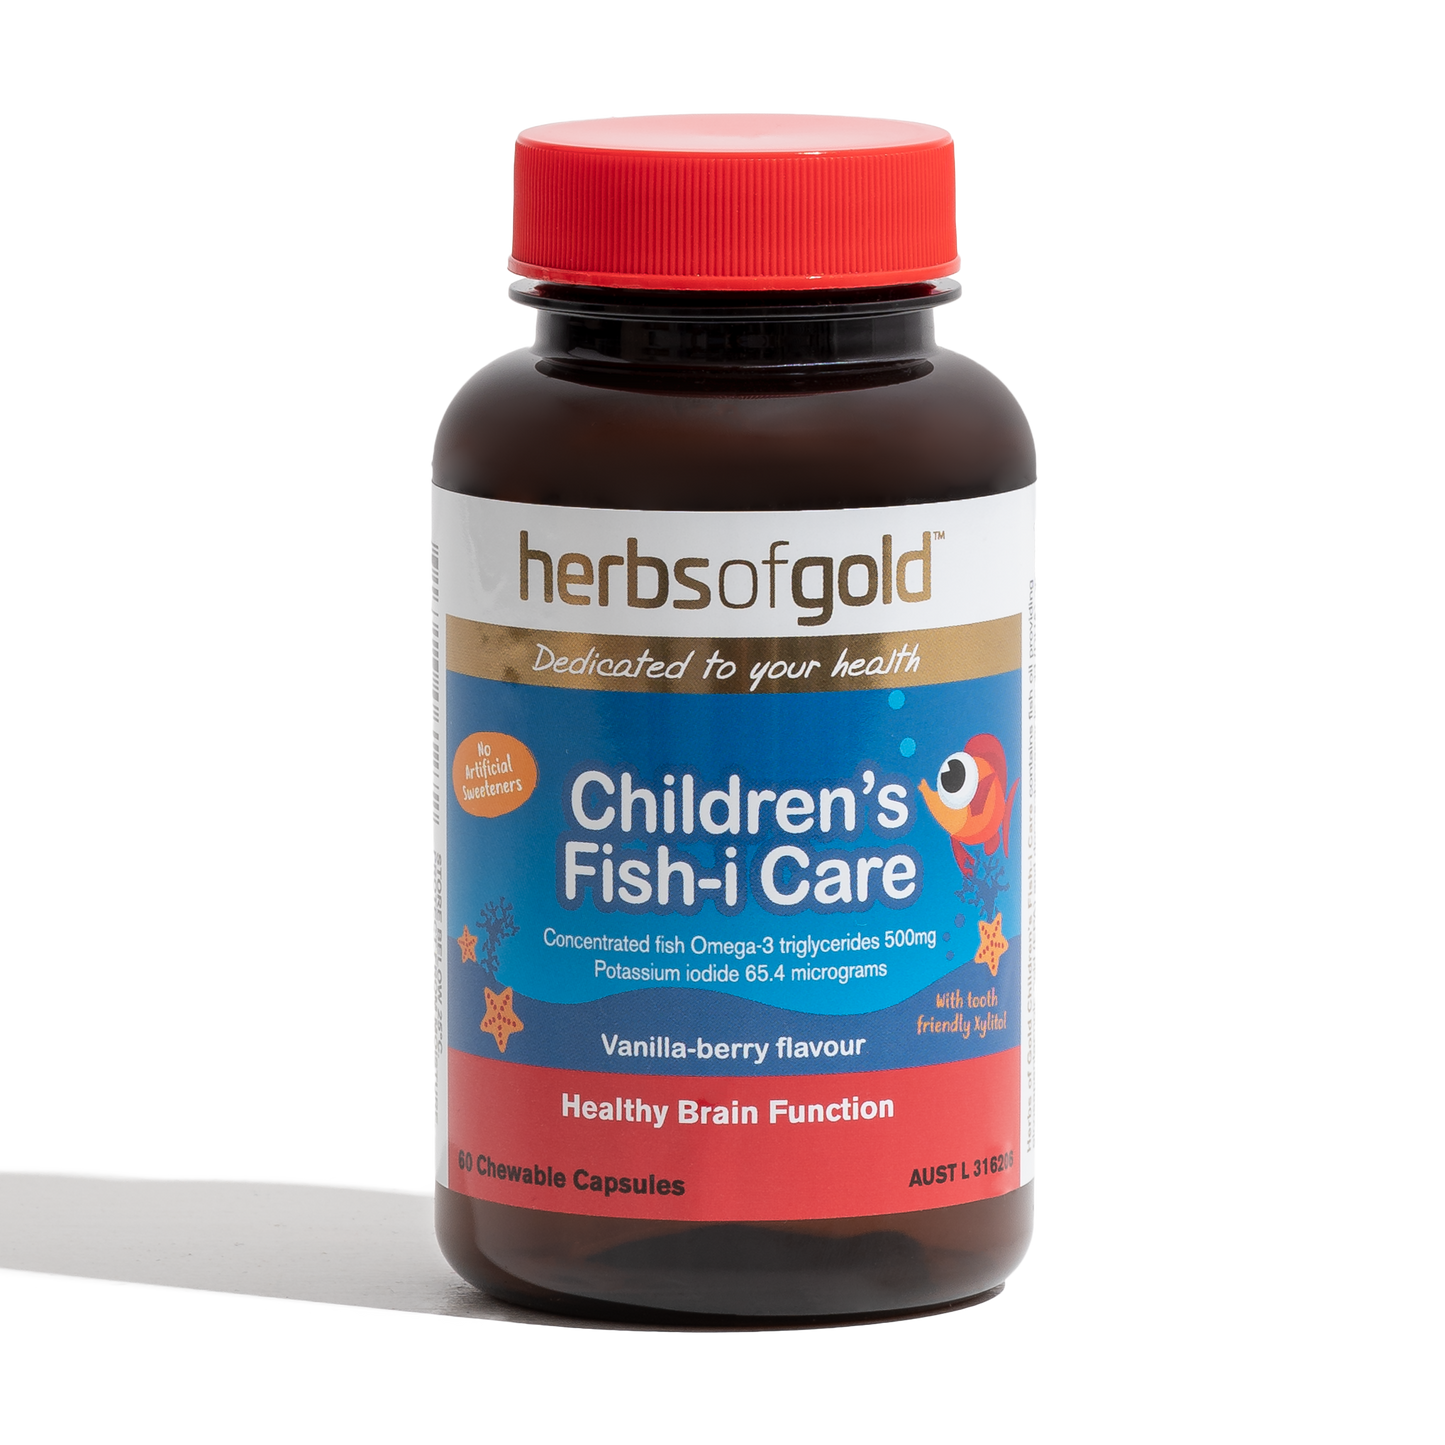 Herbs of Gold Children's Fish-i Care